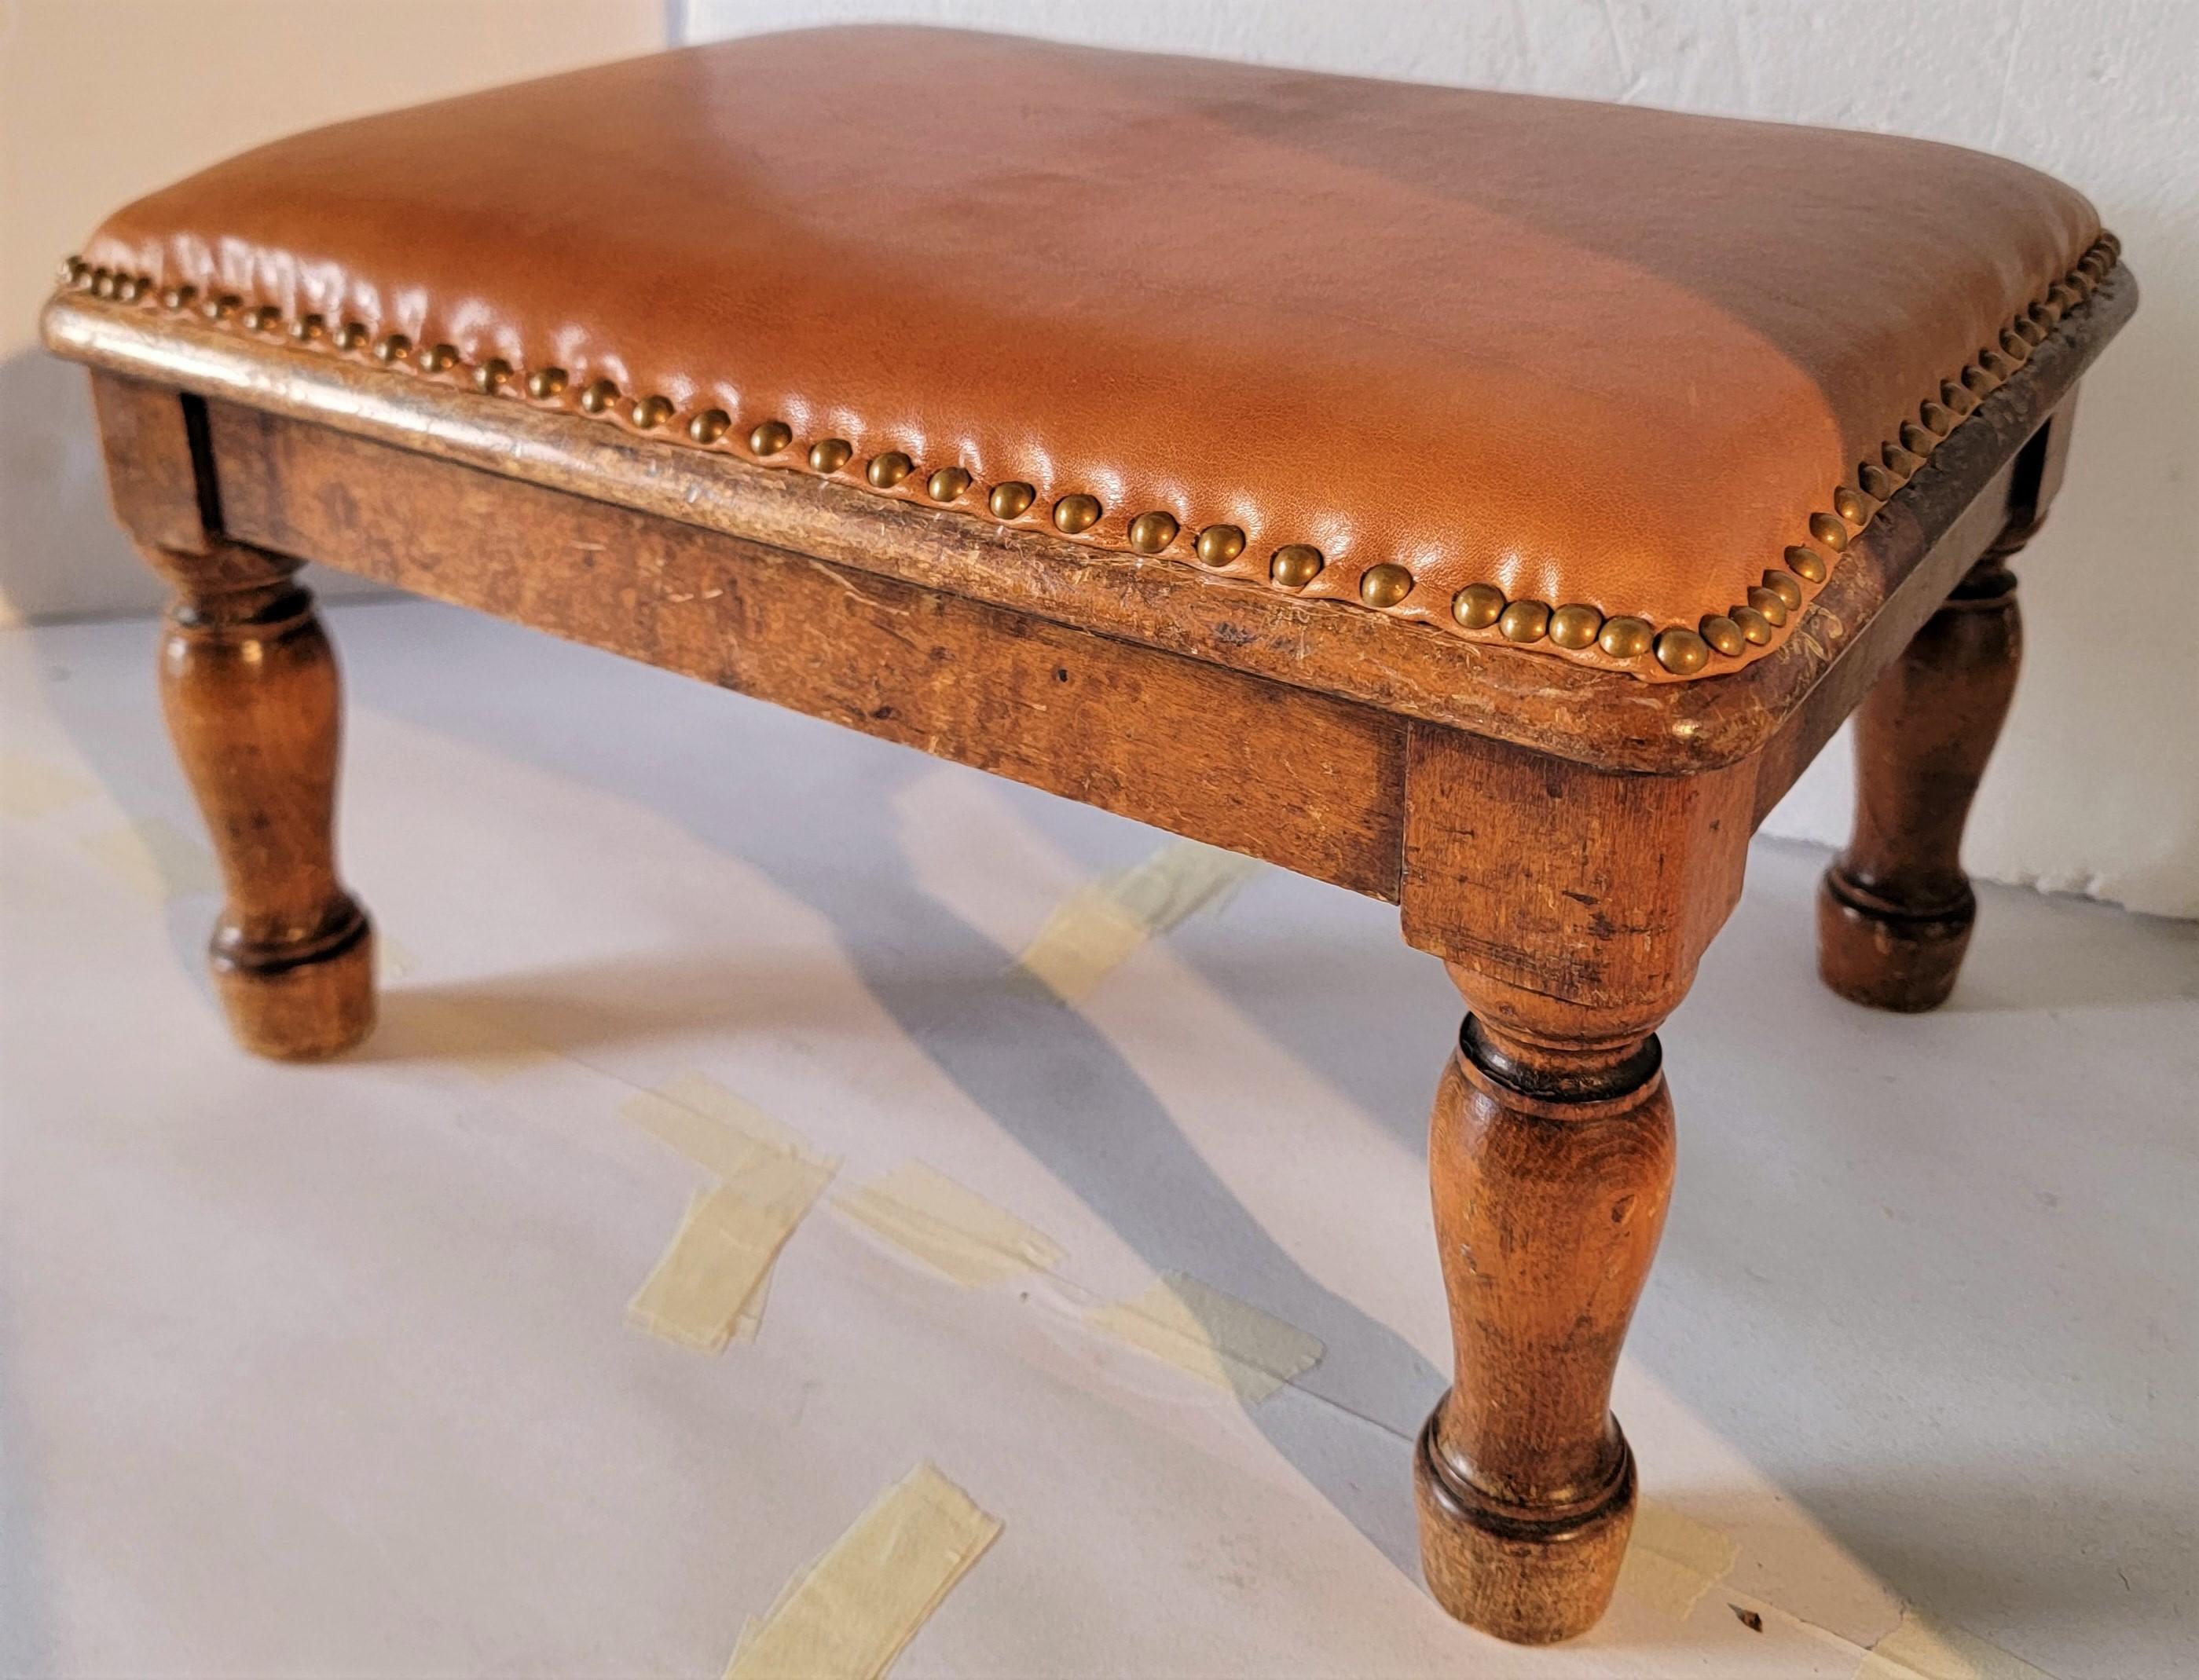 19thc Maple foot stool with a leather top ( newly upholstered ) with brass tack trim & fine vintage leather.This stool is very sturdy and in fine condition.